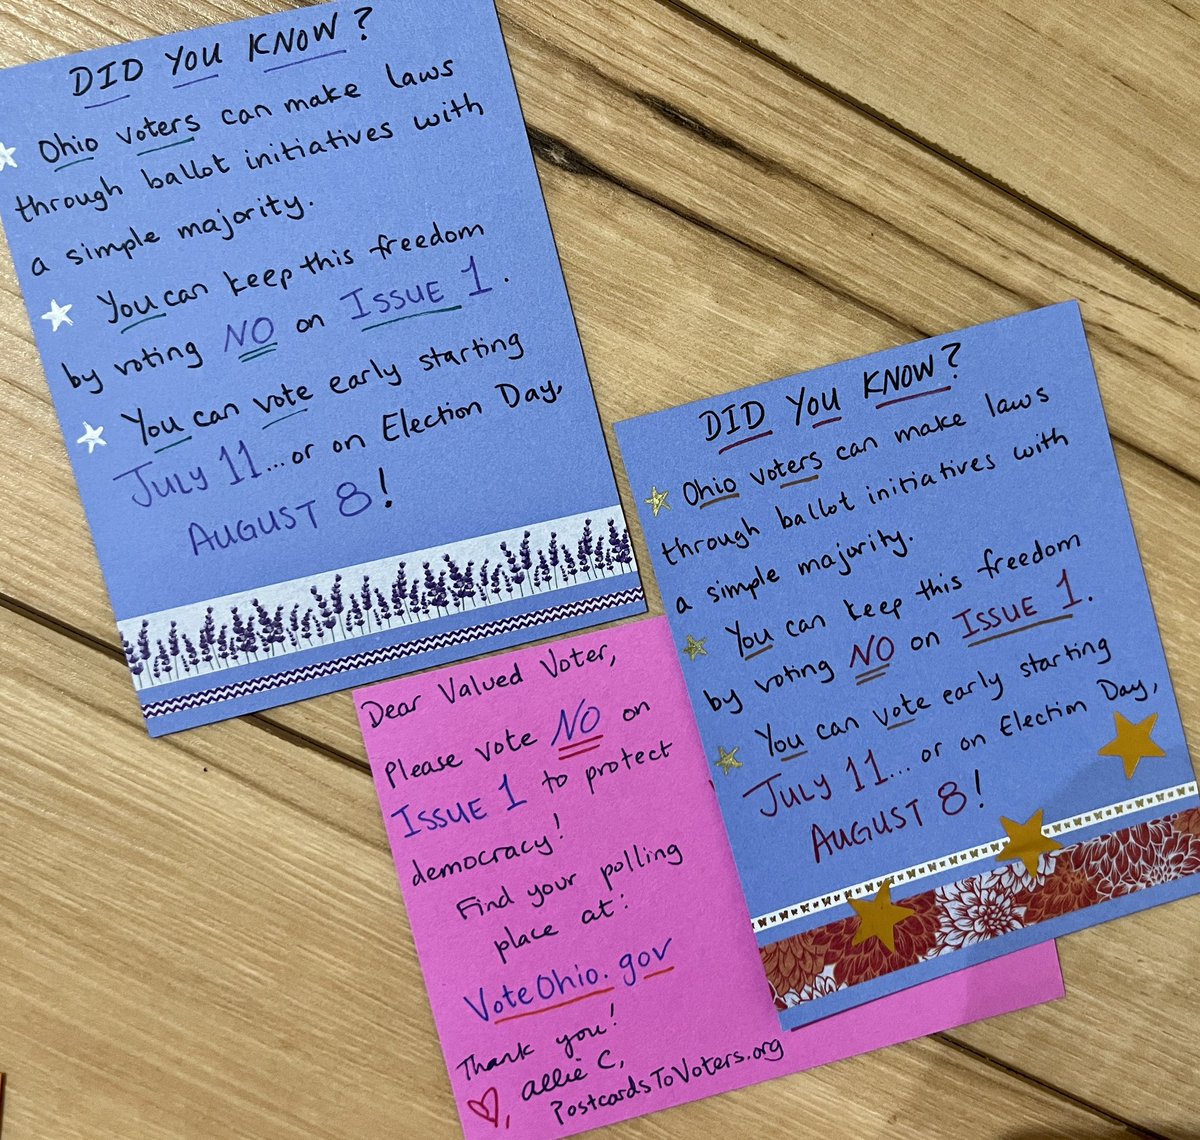 No witty text, just #PostcardsToVoters going to Ohio! Join us!